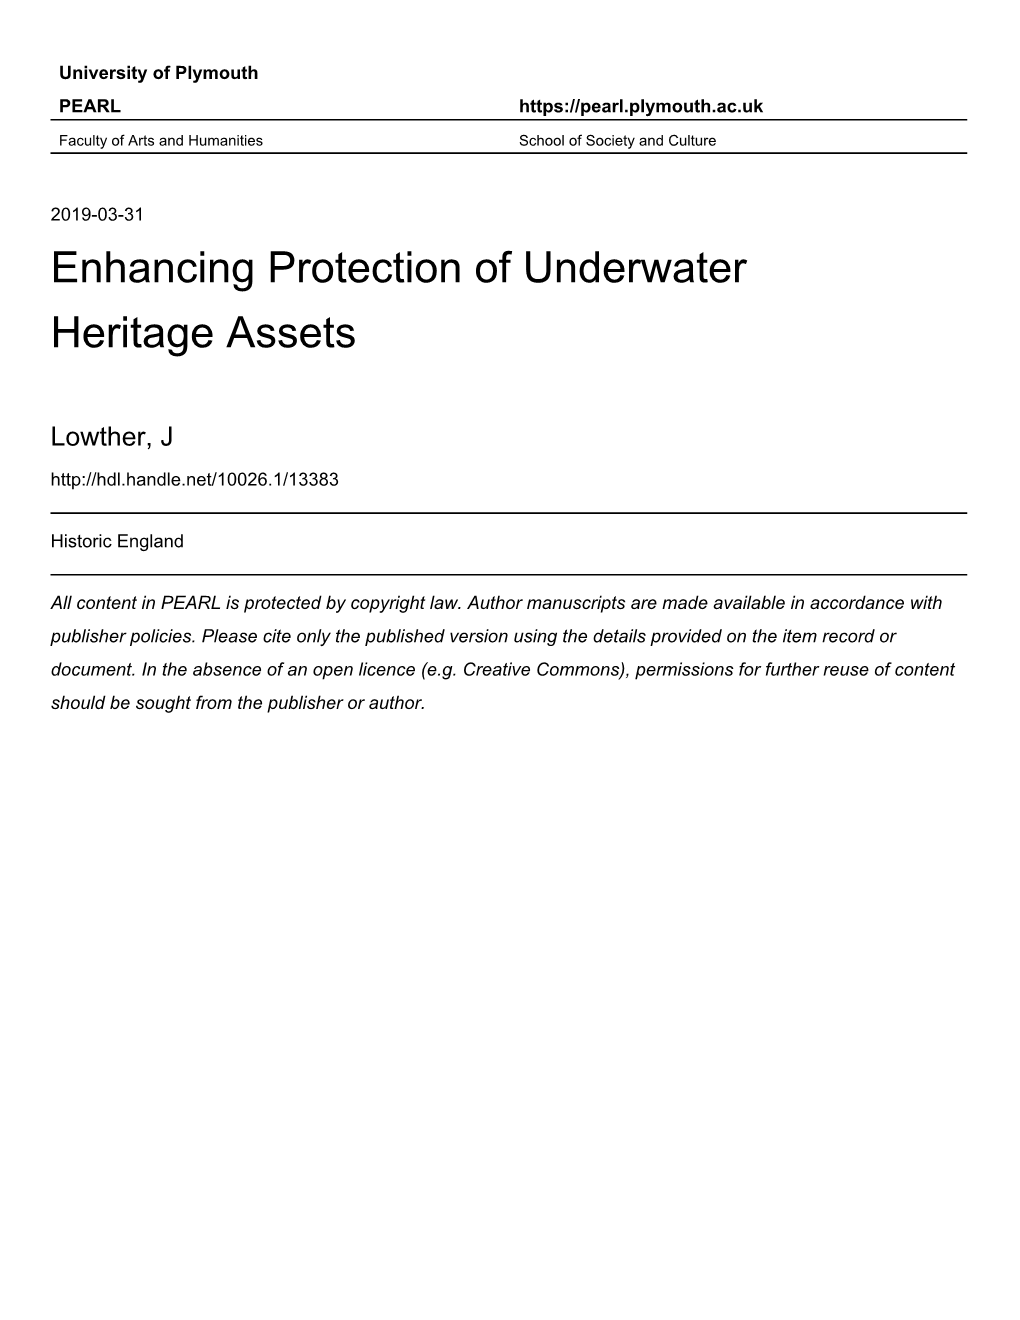 Enhancing Protection of Underwater Heritage Assets